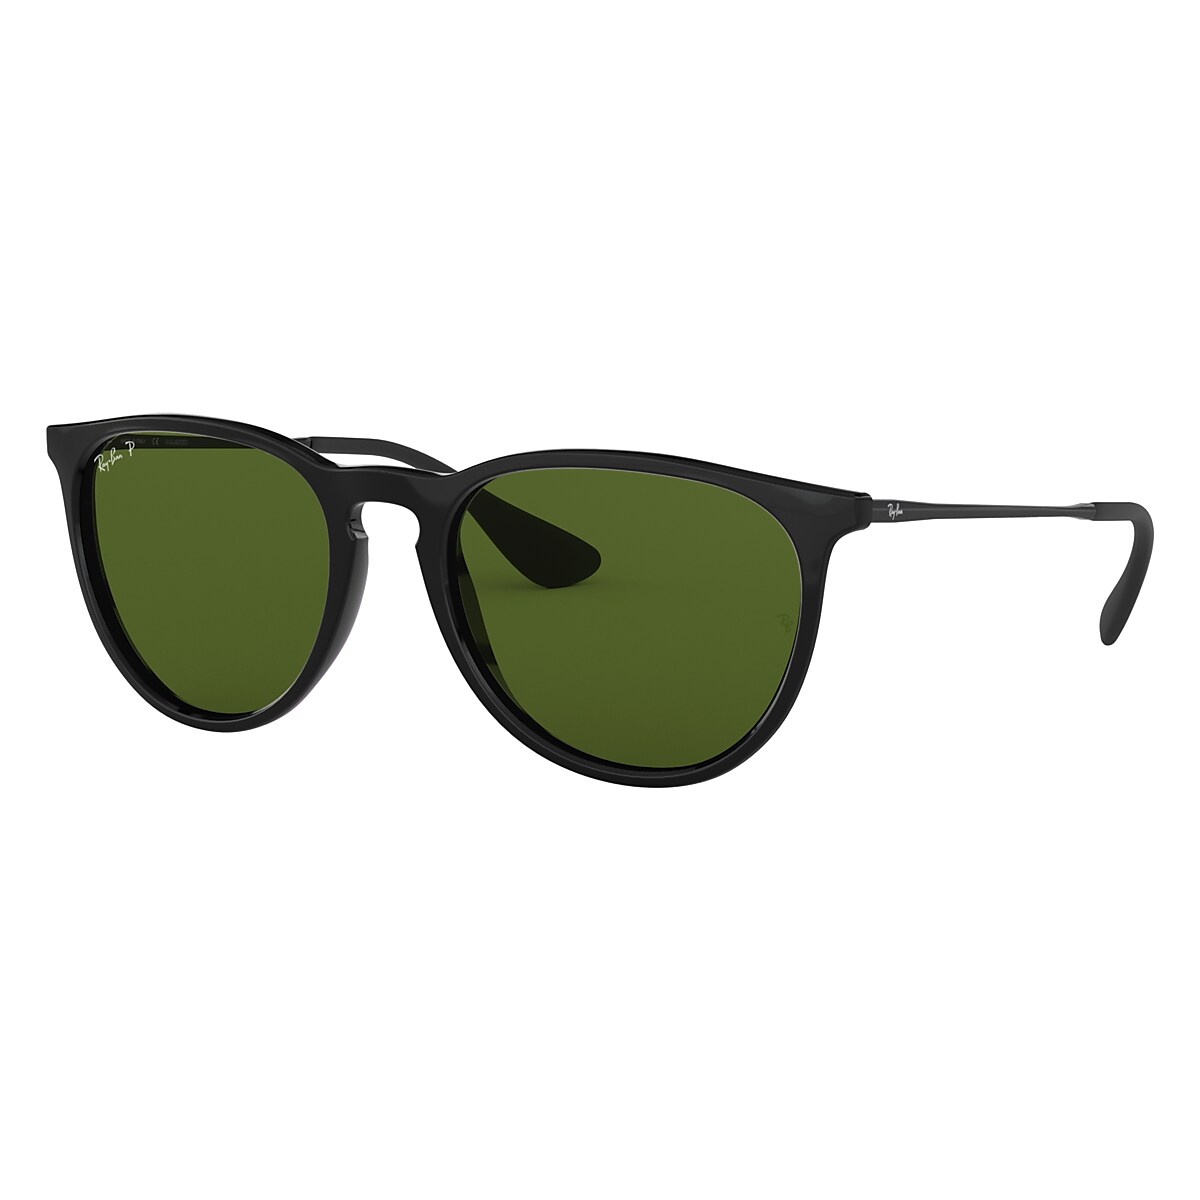 Erika Classic Sunglasses in Black and Green | Ray-Ban®